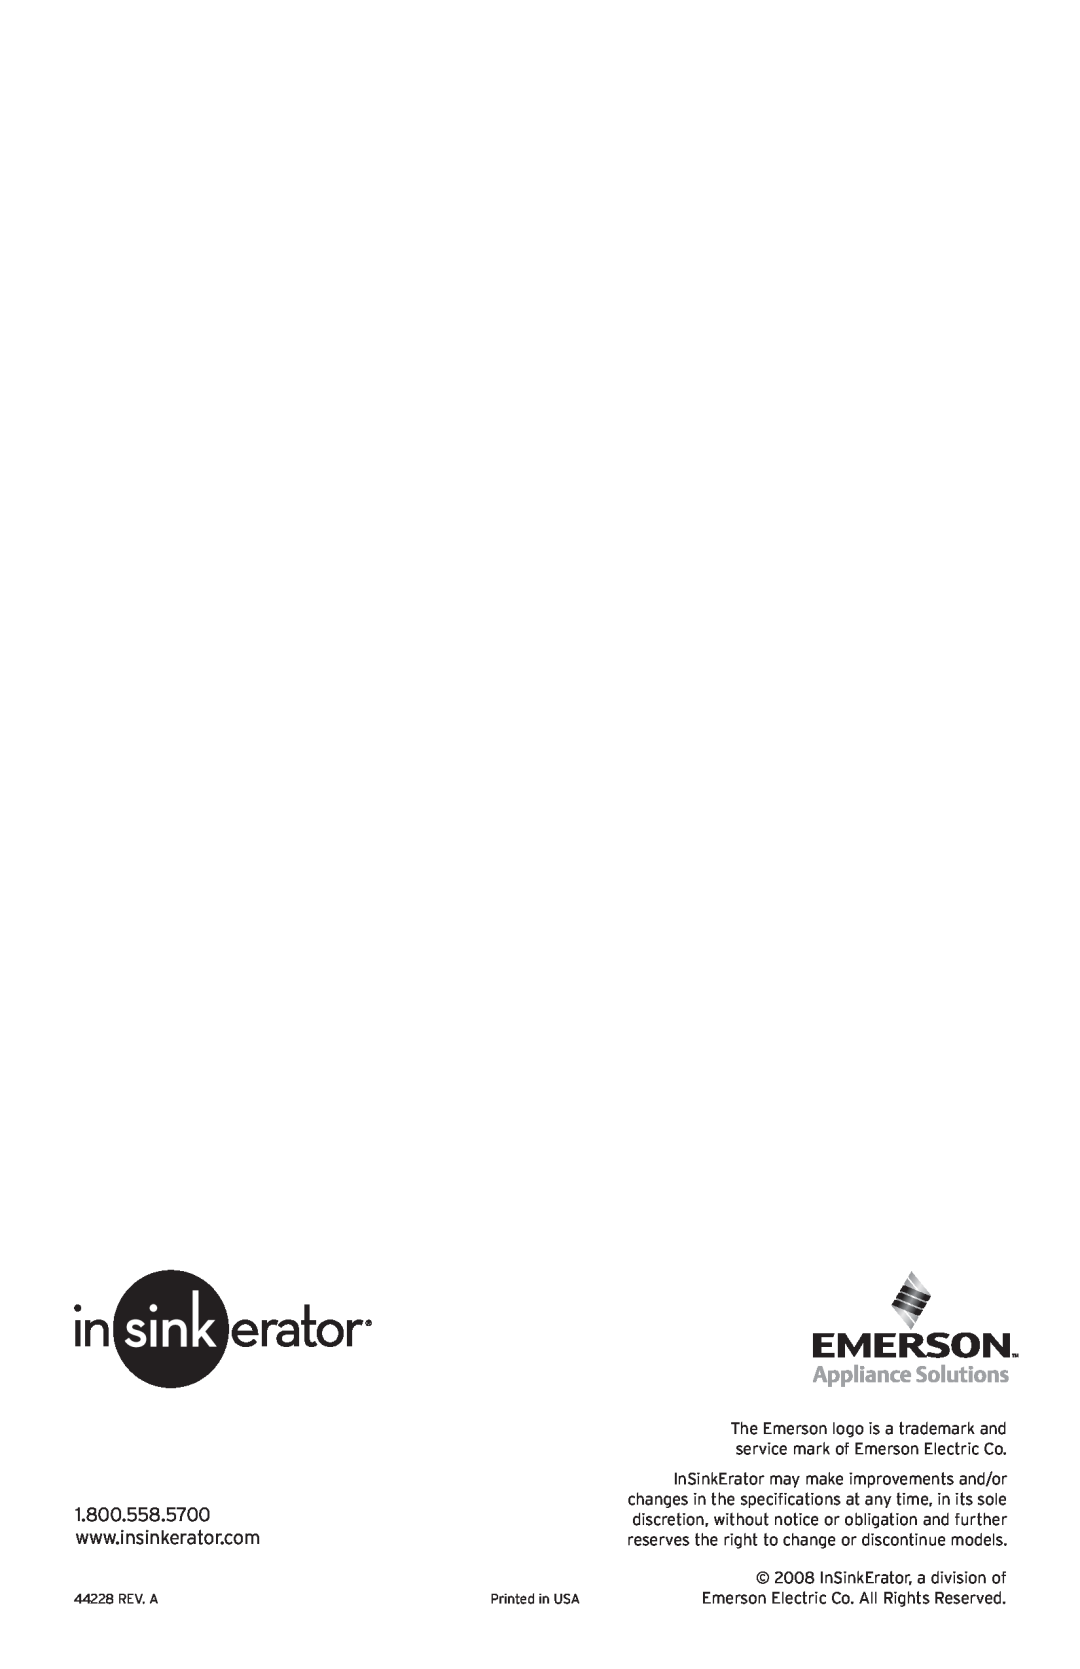 InSinkErator H770 The Emerson logo is a trademark and, service mark of Emerson Electric Co, InSinkErator, a division of 